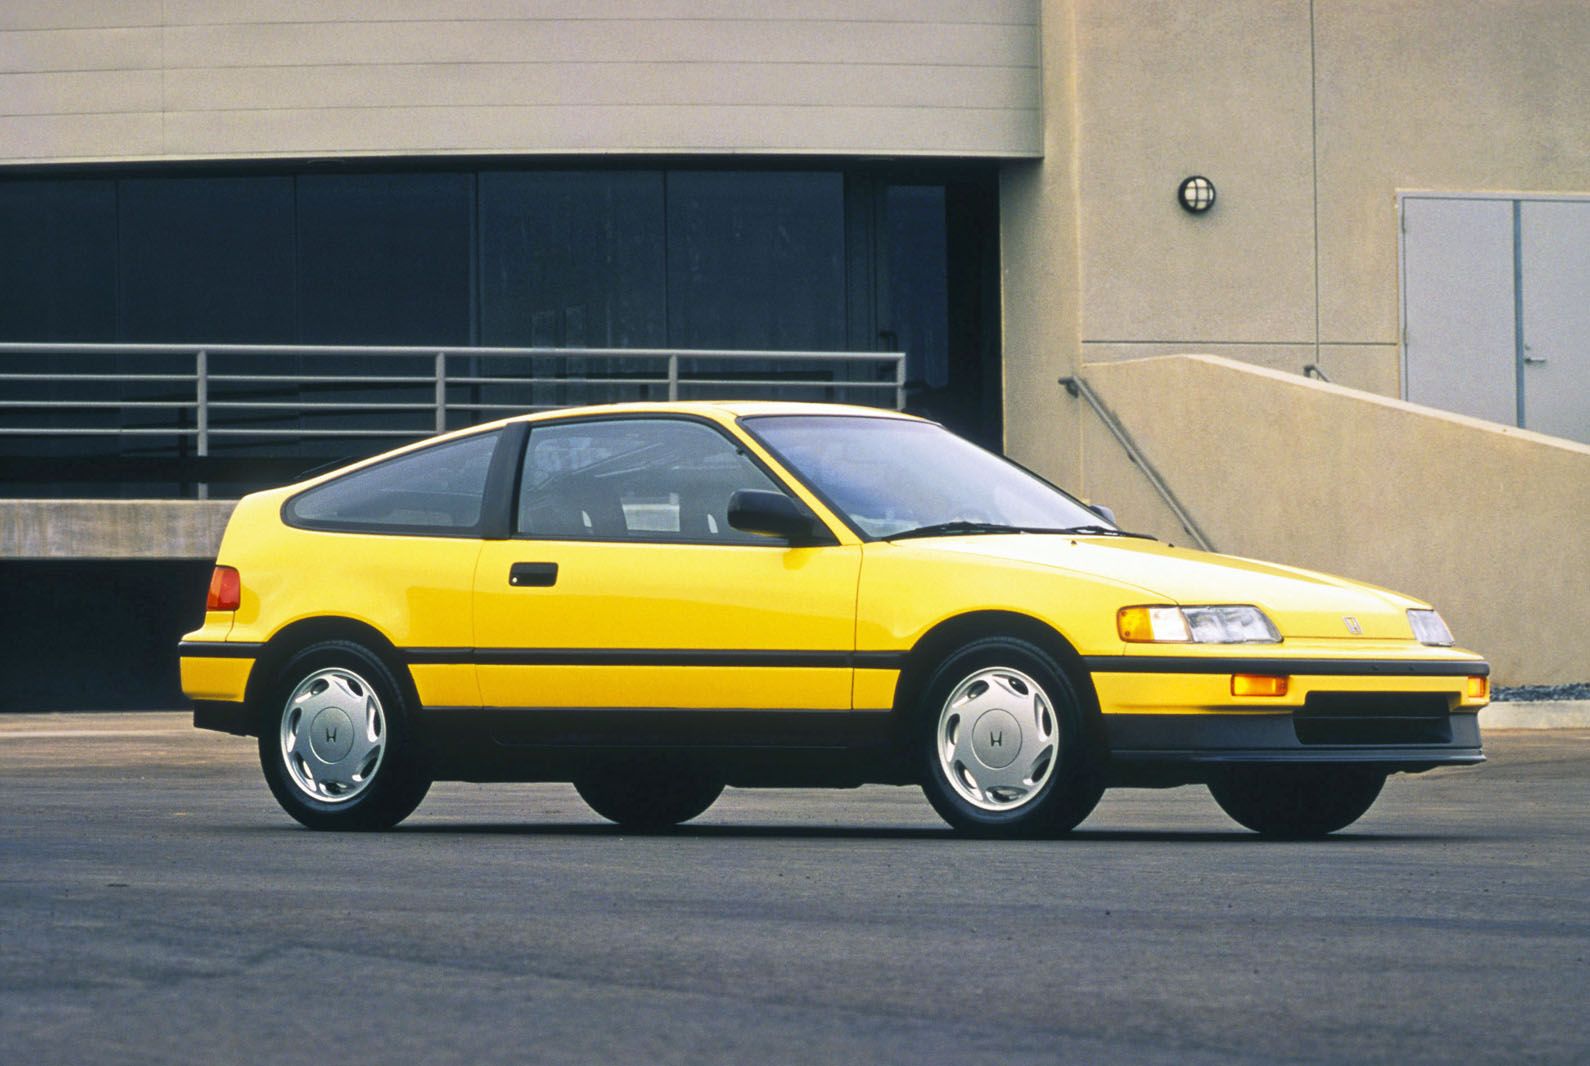 1989 Honda CRX: A great sports car that is affordable.